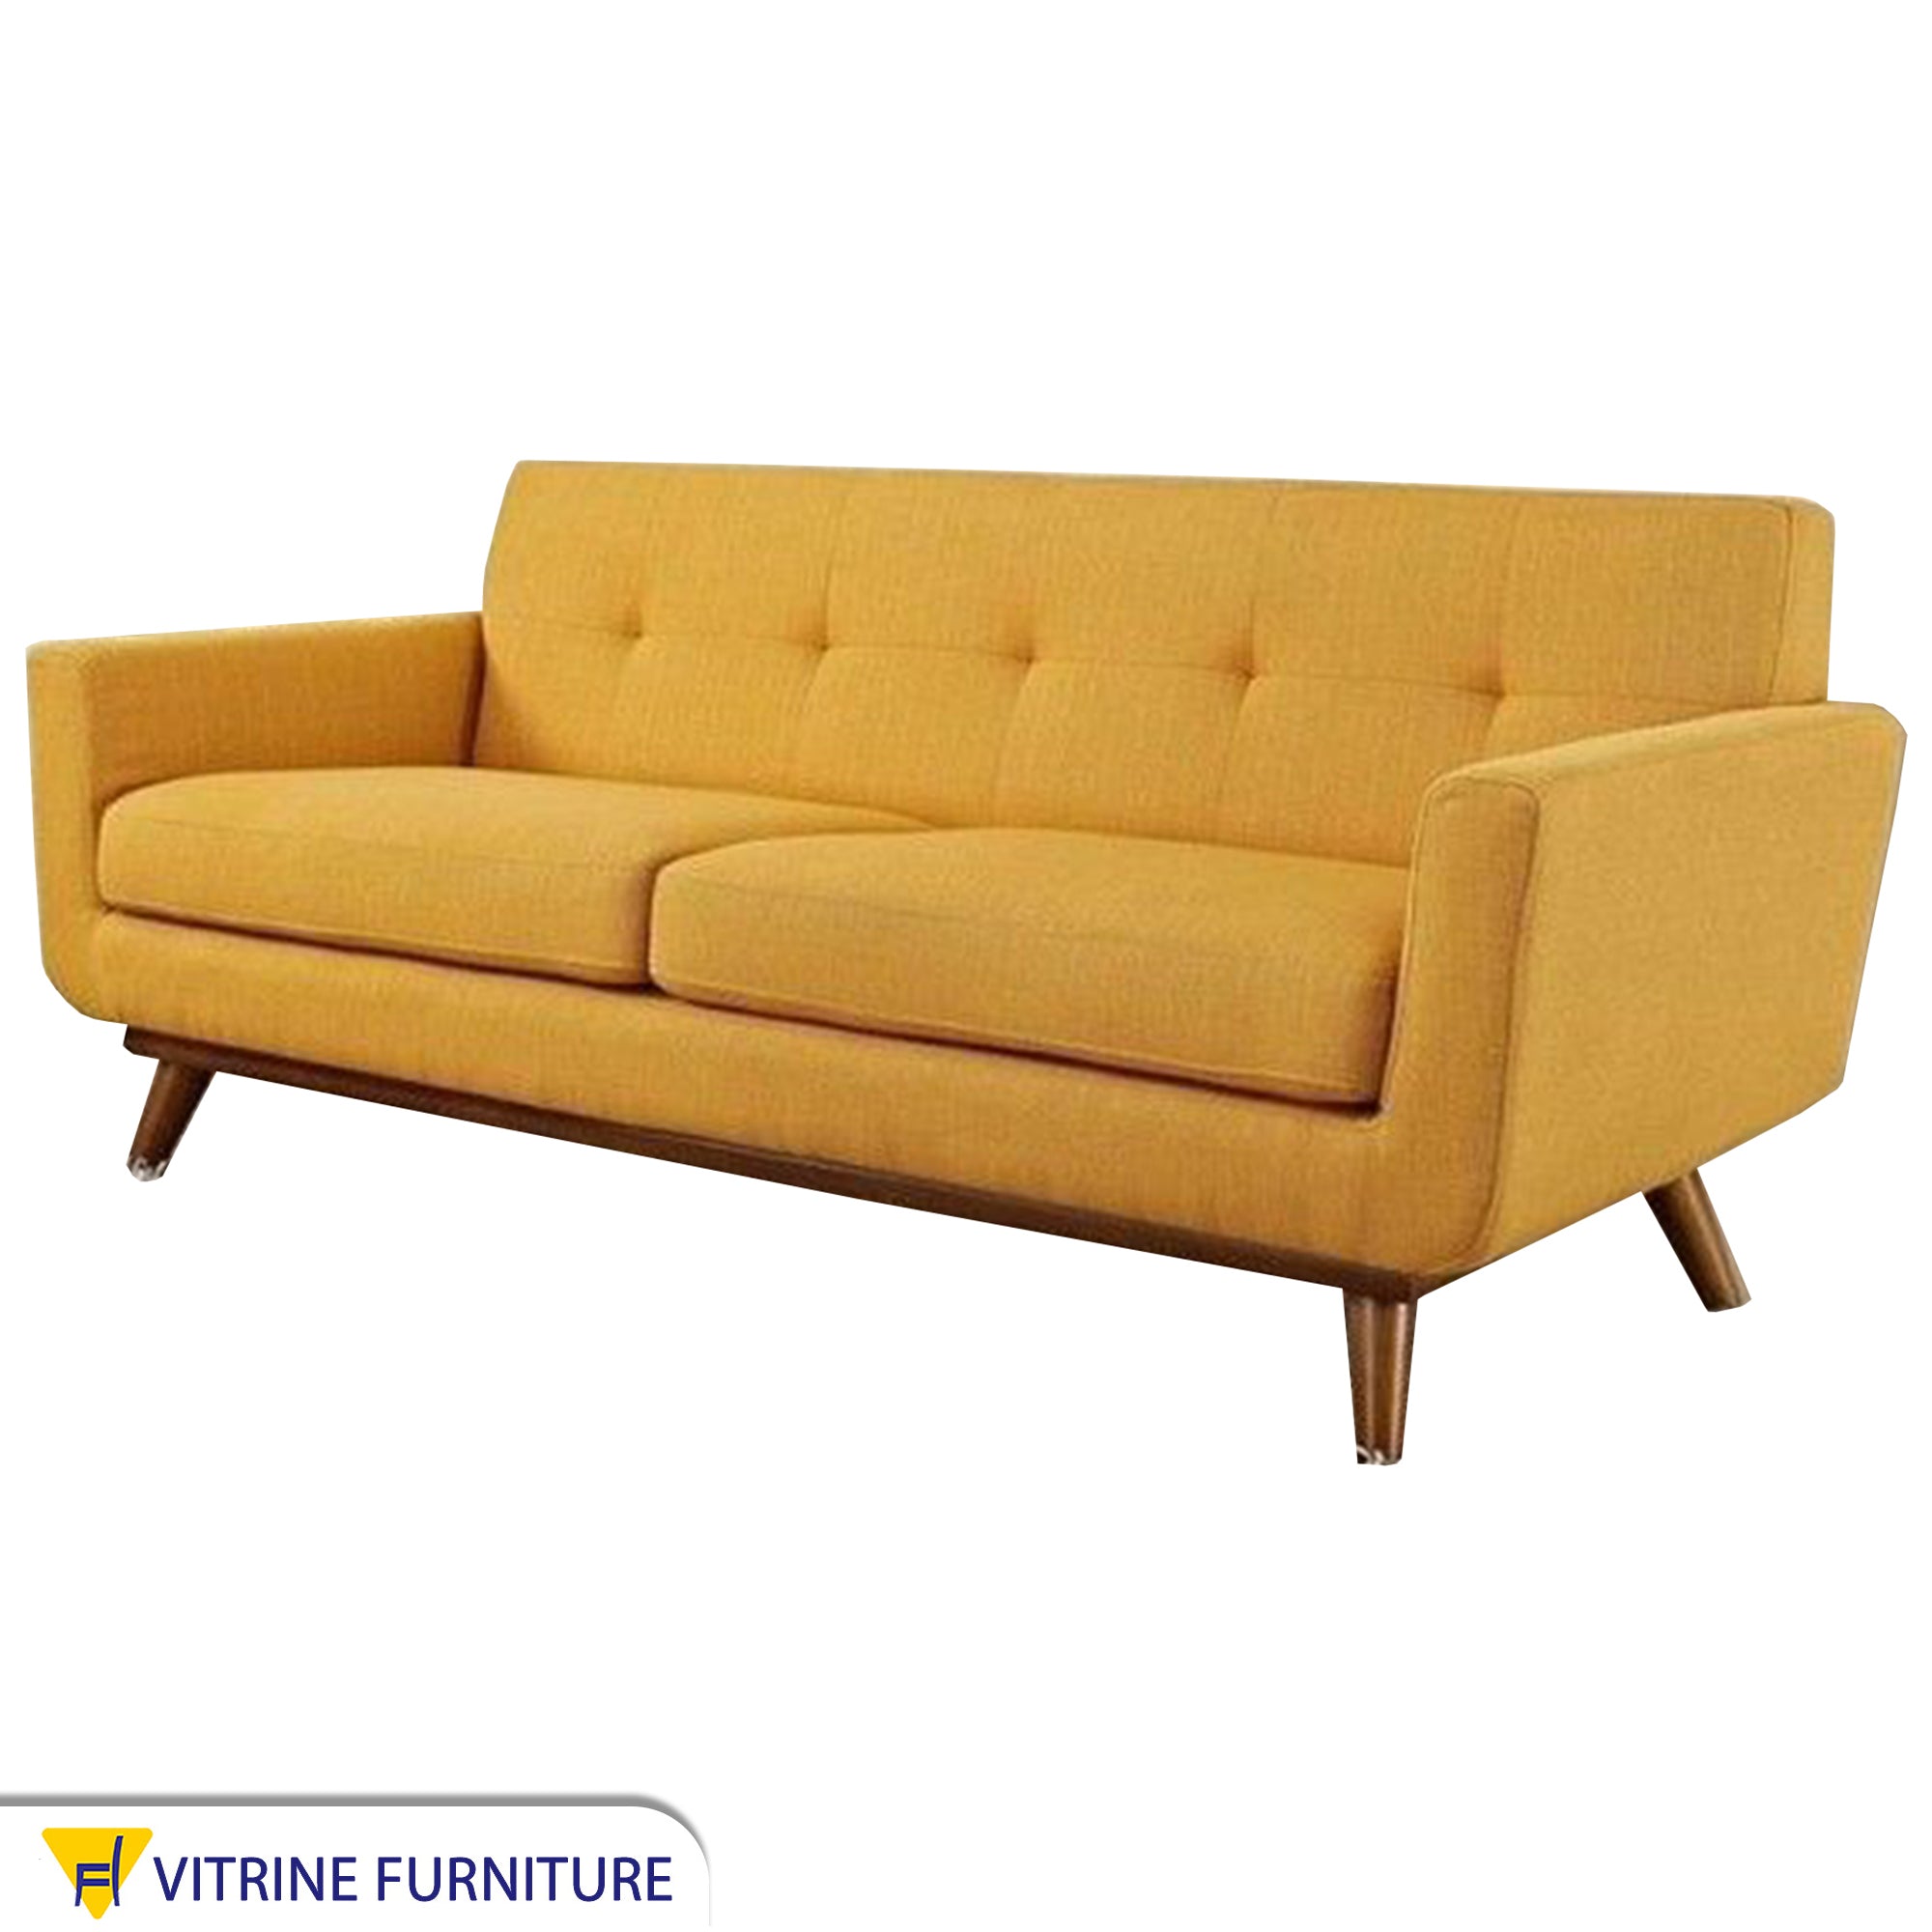 Camel yellow sofa with slanted legs